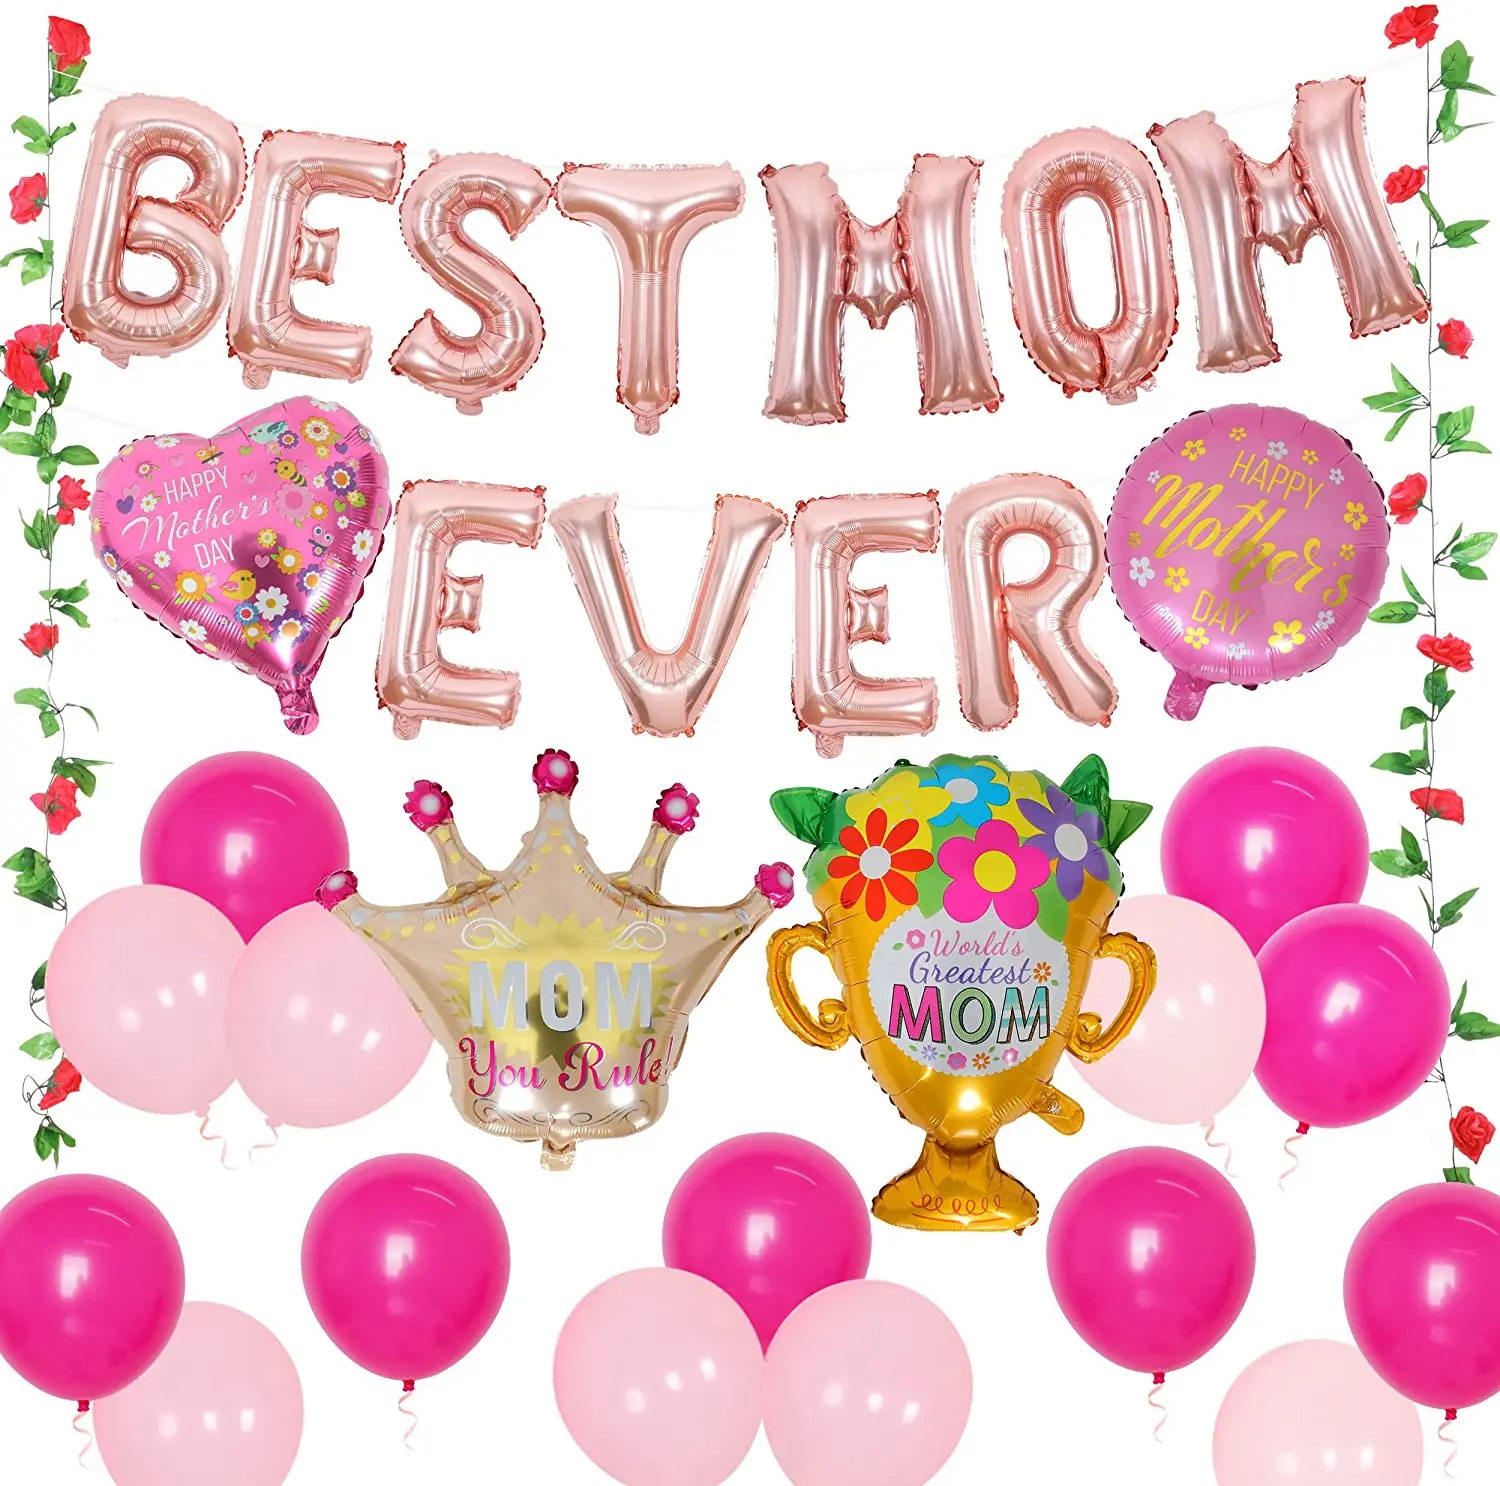 

Cheereveal Happy Mothers’ Day Balloon Set Rose Gold Best Mom Ever Heart Balloons for Mother Birthday Family Party Decorations